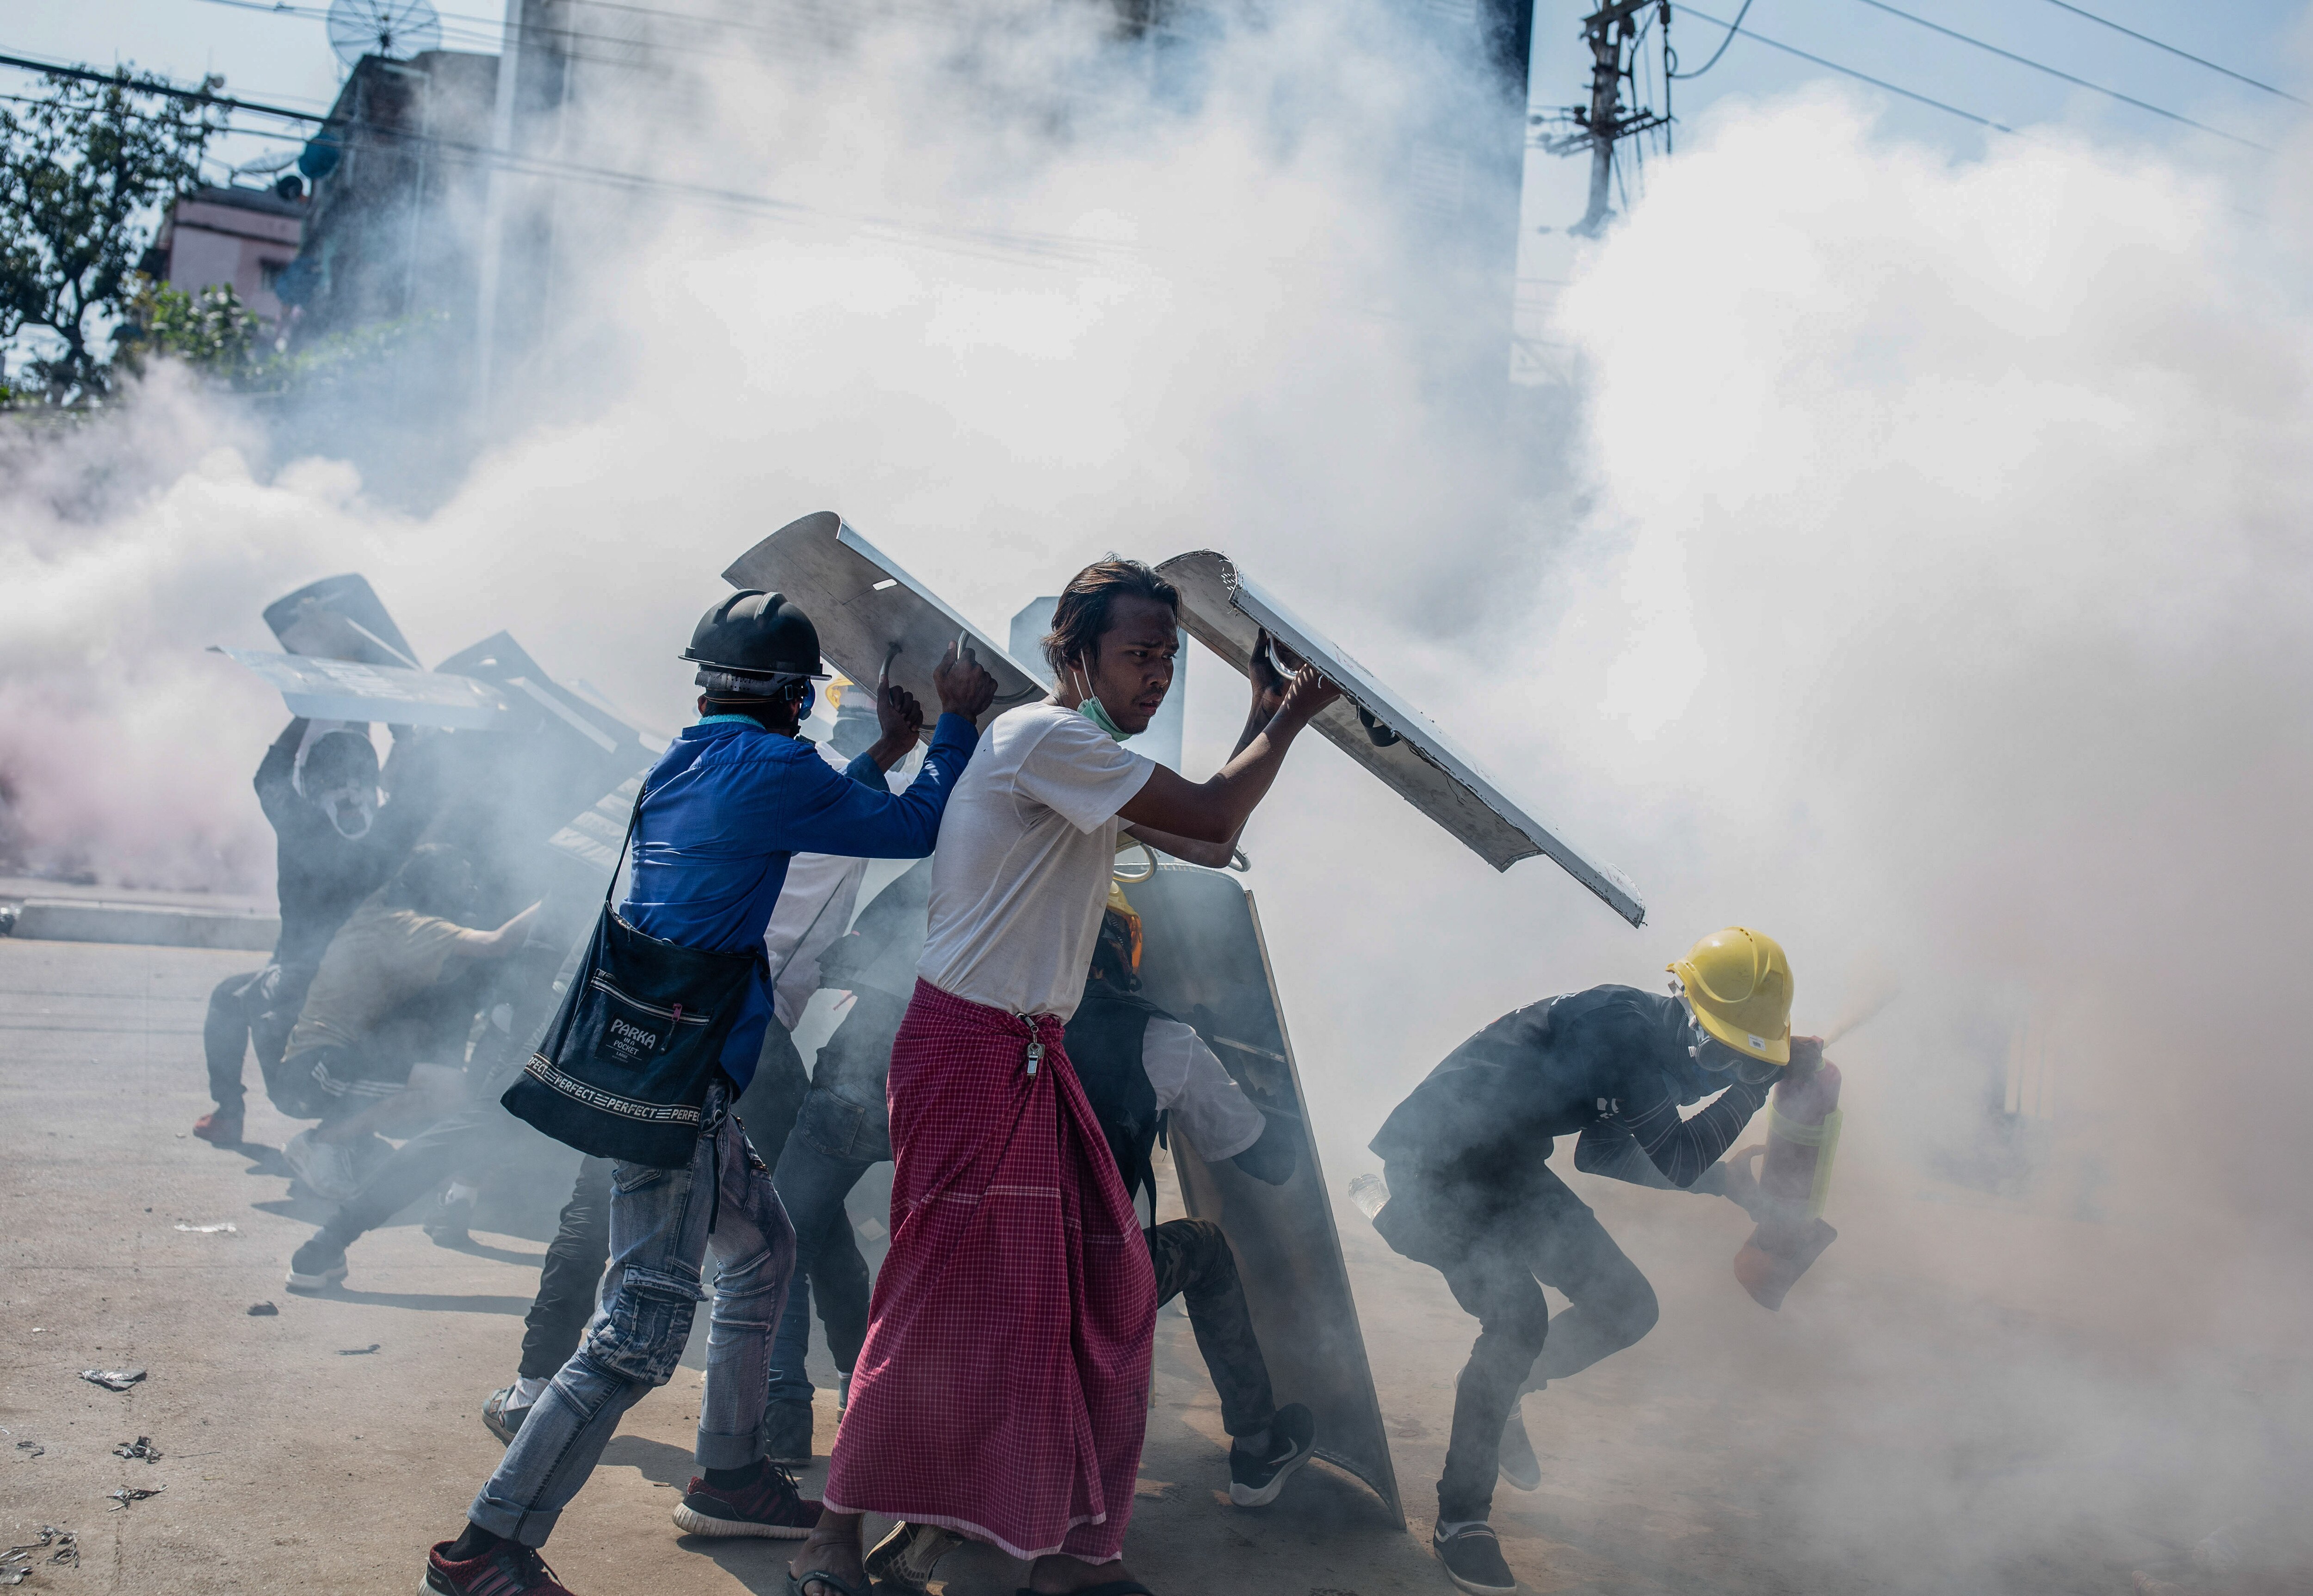 Protesters react after riot police fire tear gas in Myanmar.